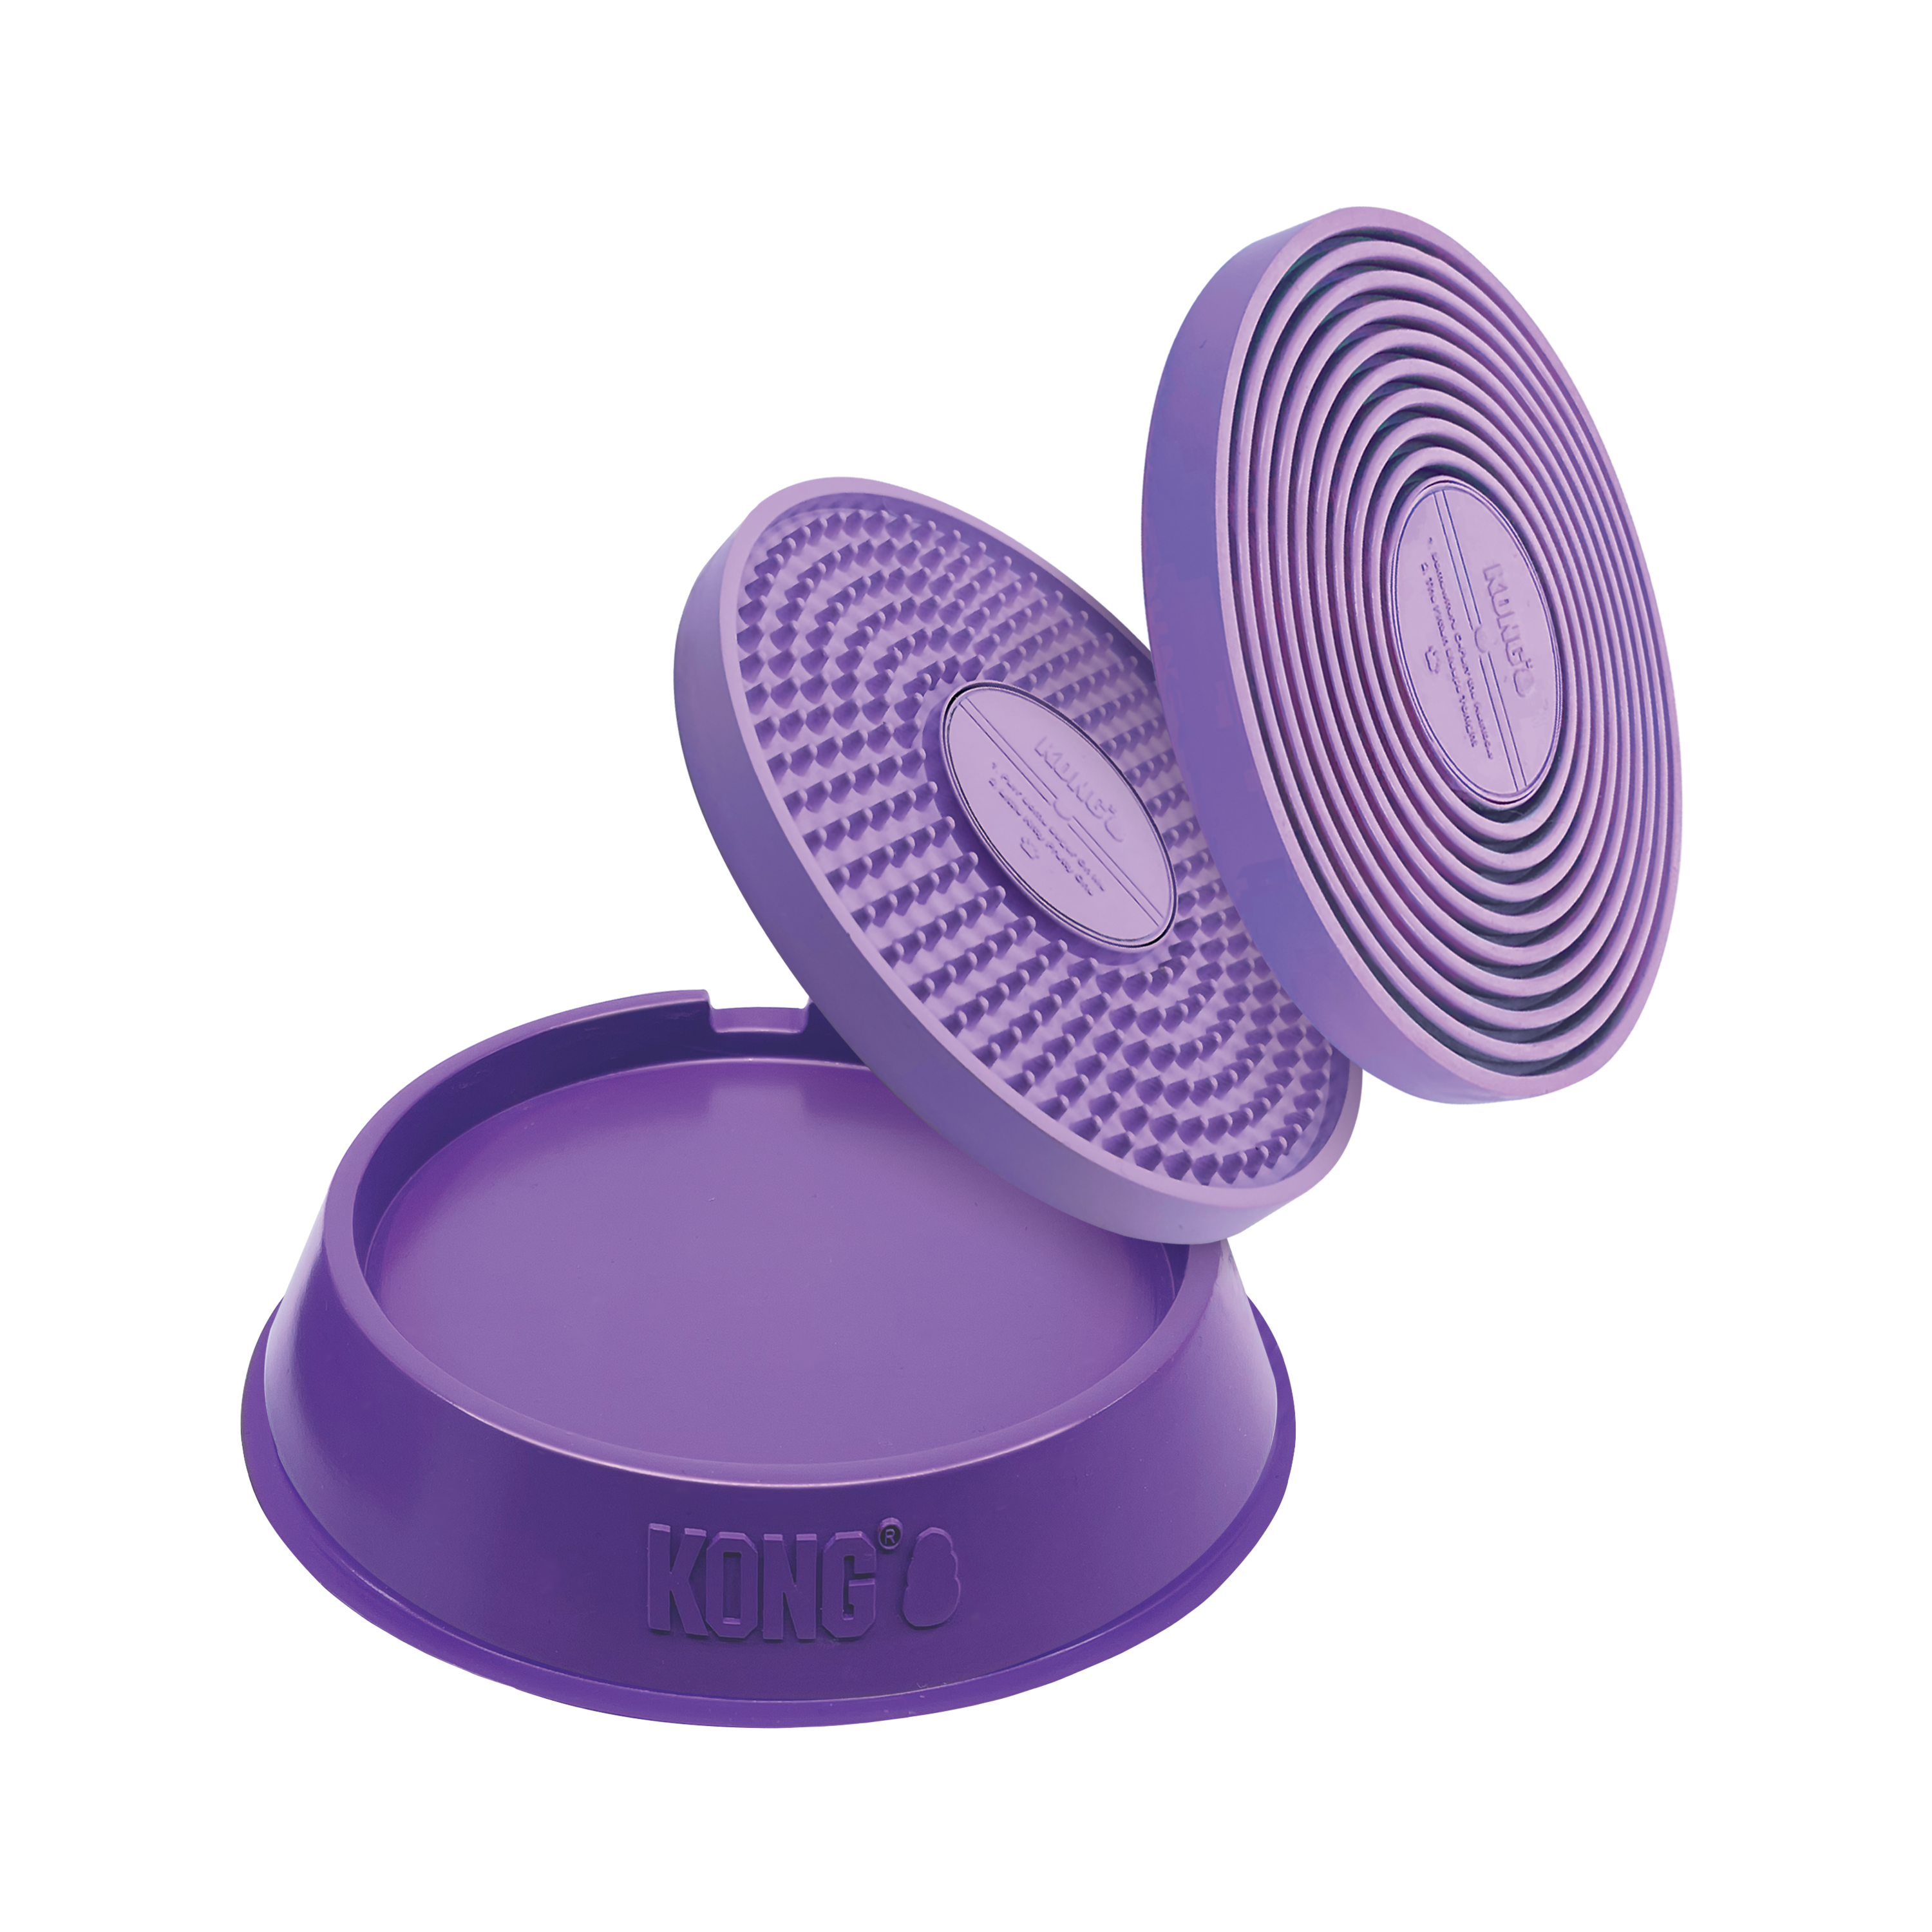 Licks Spinz educational1 product image